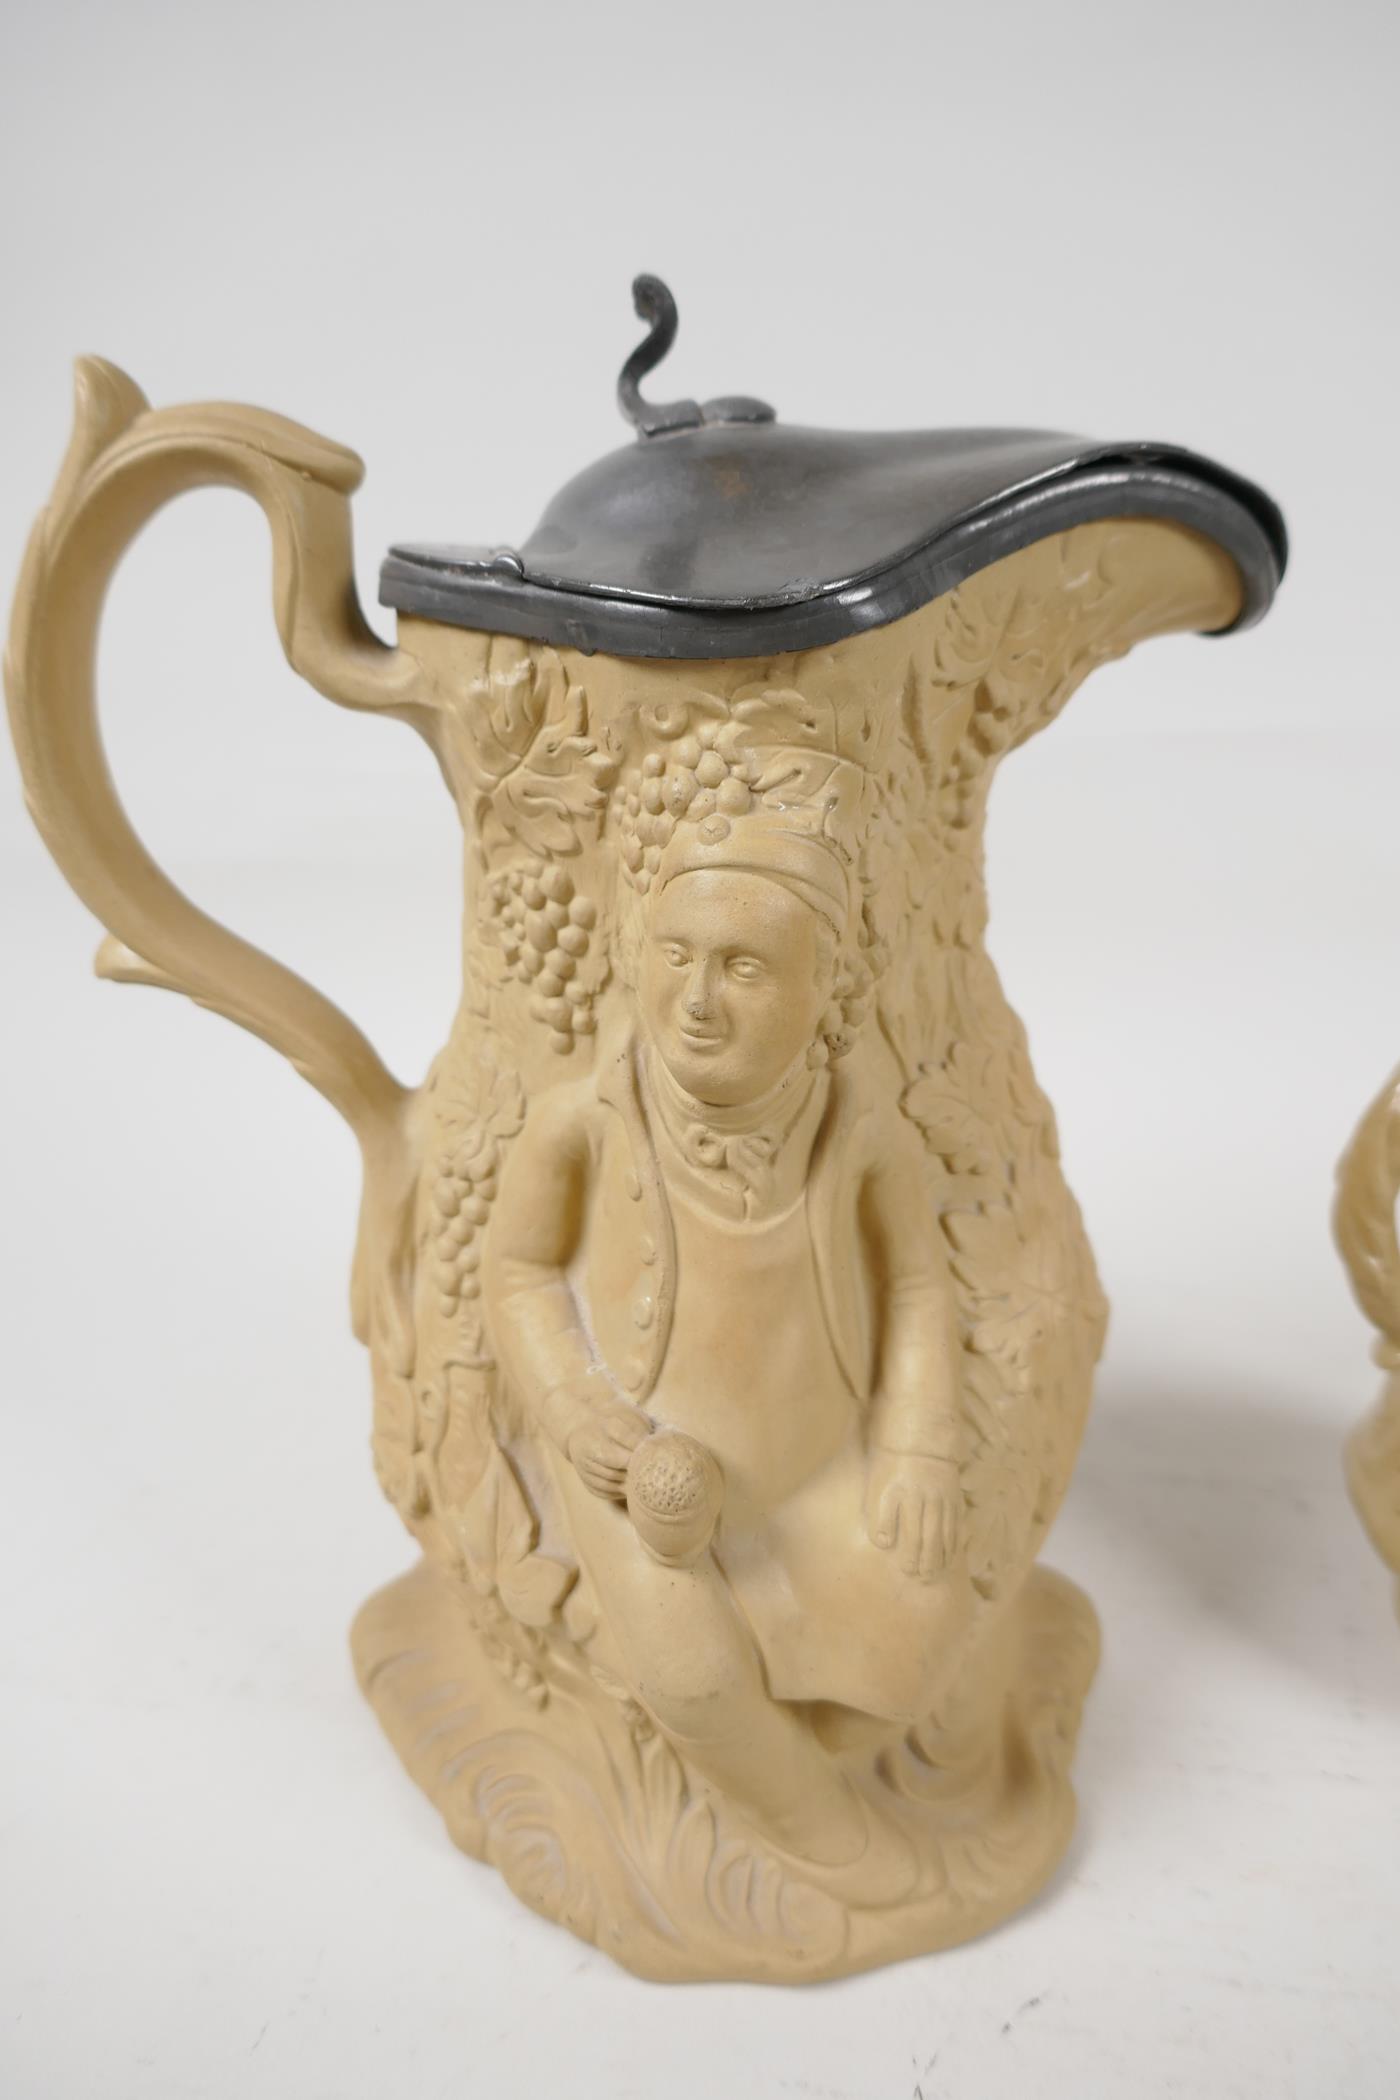 A C19th stoneware jug moulded with figures and fruiting vines, with sandstone matt glaze and - Image 6 of 6